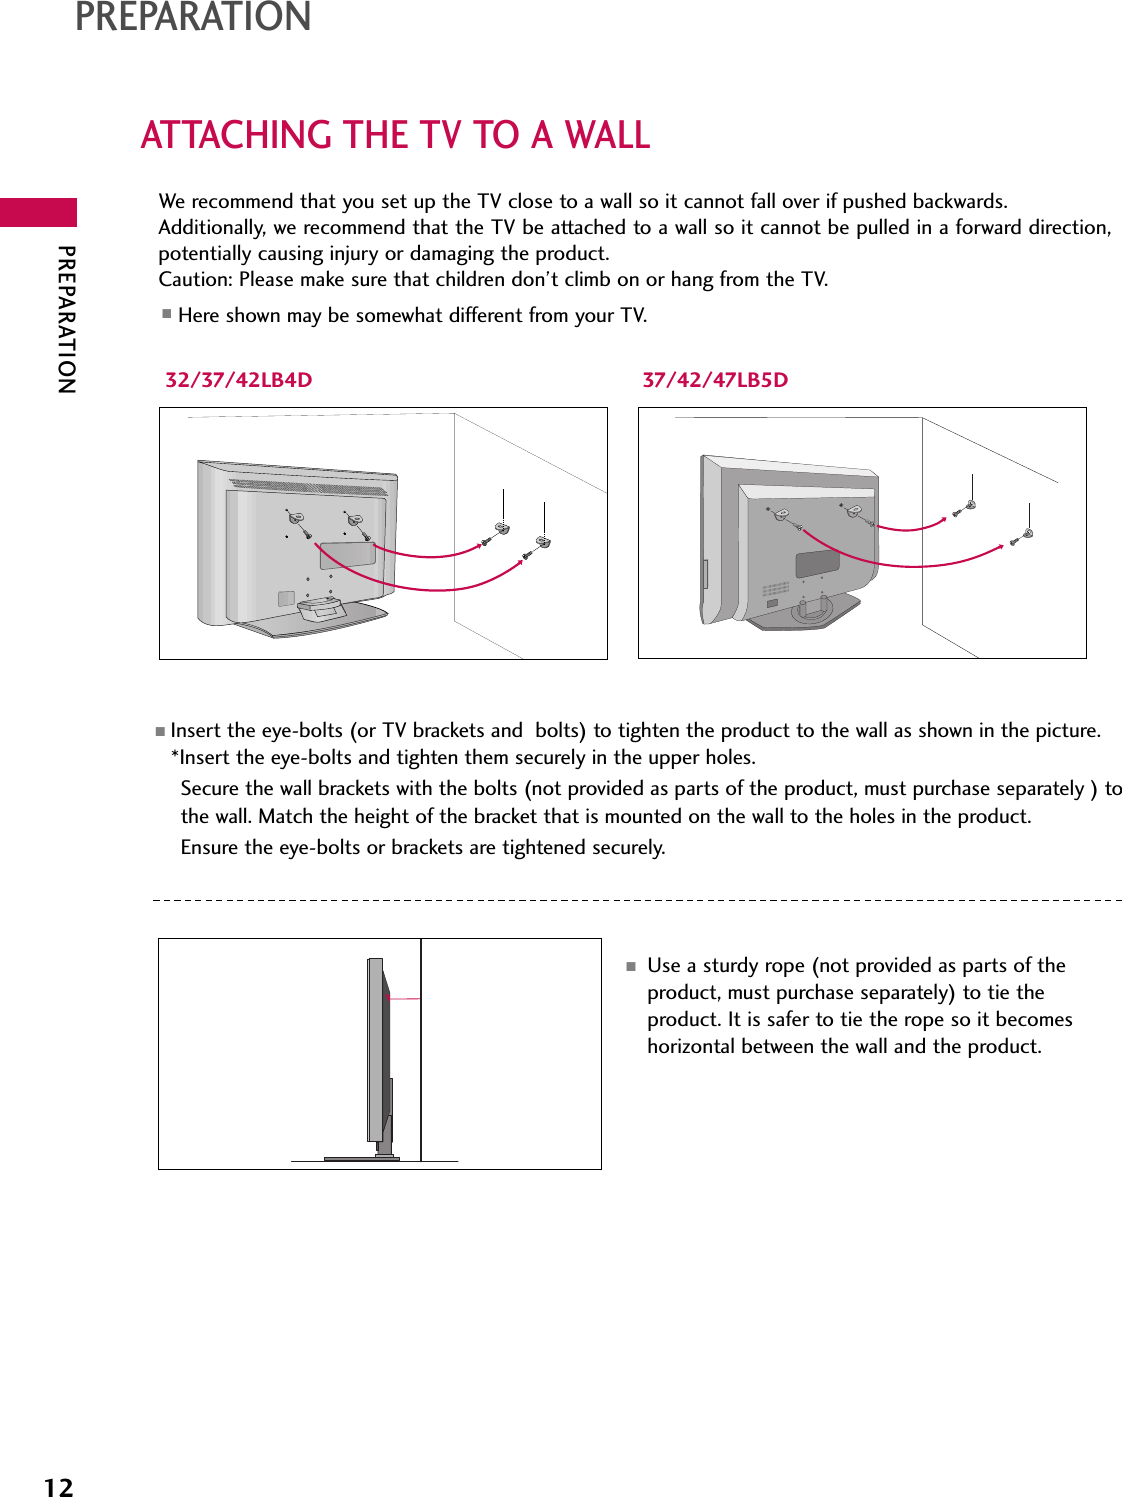 PREPARATION12PREPARATIONATTACHING THE TV TO A WALL32/37/42LB4D 37/42/47LB5DWe recommend that you set up the TV close to a wall so it cannot fall over if pushed backwards. Additionally, we recommend that the TV be attached to a wall so it cannot be pulled in a forward direction,potentially causing injury or damaging the product. Caution: Please make sure that children don’t climb on or hang from the TV. ■Insert the eye-bolts (or TV brackets and  bolts) to tighten the product to the wall as shown in the picture.*Insert the eye-bolts and tighten them securely in the upper holes.Secure the wall brackets with the bolts (not provided as parts of the product, must purchase separately ) tothe wall. Match the height of the bracket that is mounted on the wall to the holes in the product.Ensure the eye-bolts or brackets are tightened securely.■Use a sturdy rope (not provided as parts of theproduct, must purchase separately) to tie theproduct. It is safer to tie the rope so it becomeshorizontal between the wall and the product.■Here shown may be somewhat different from your TV.